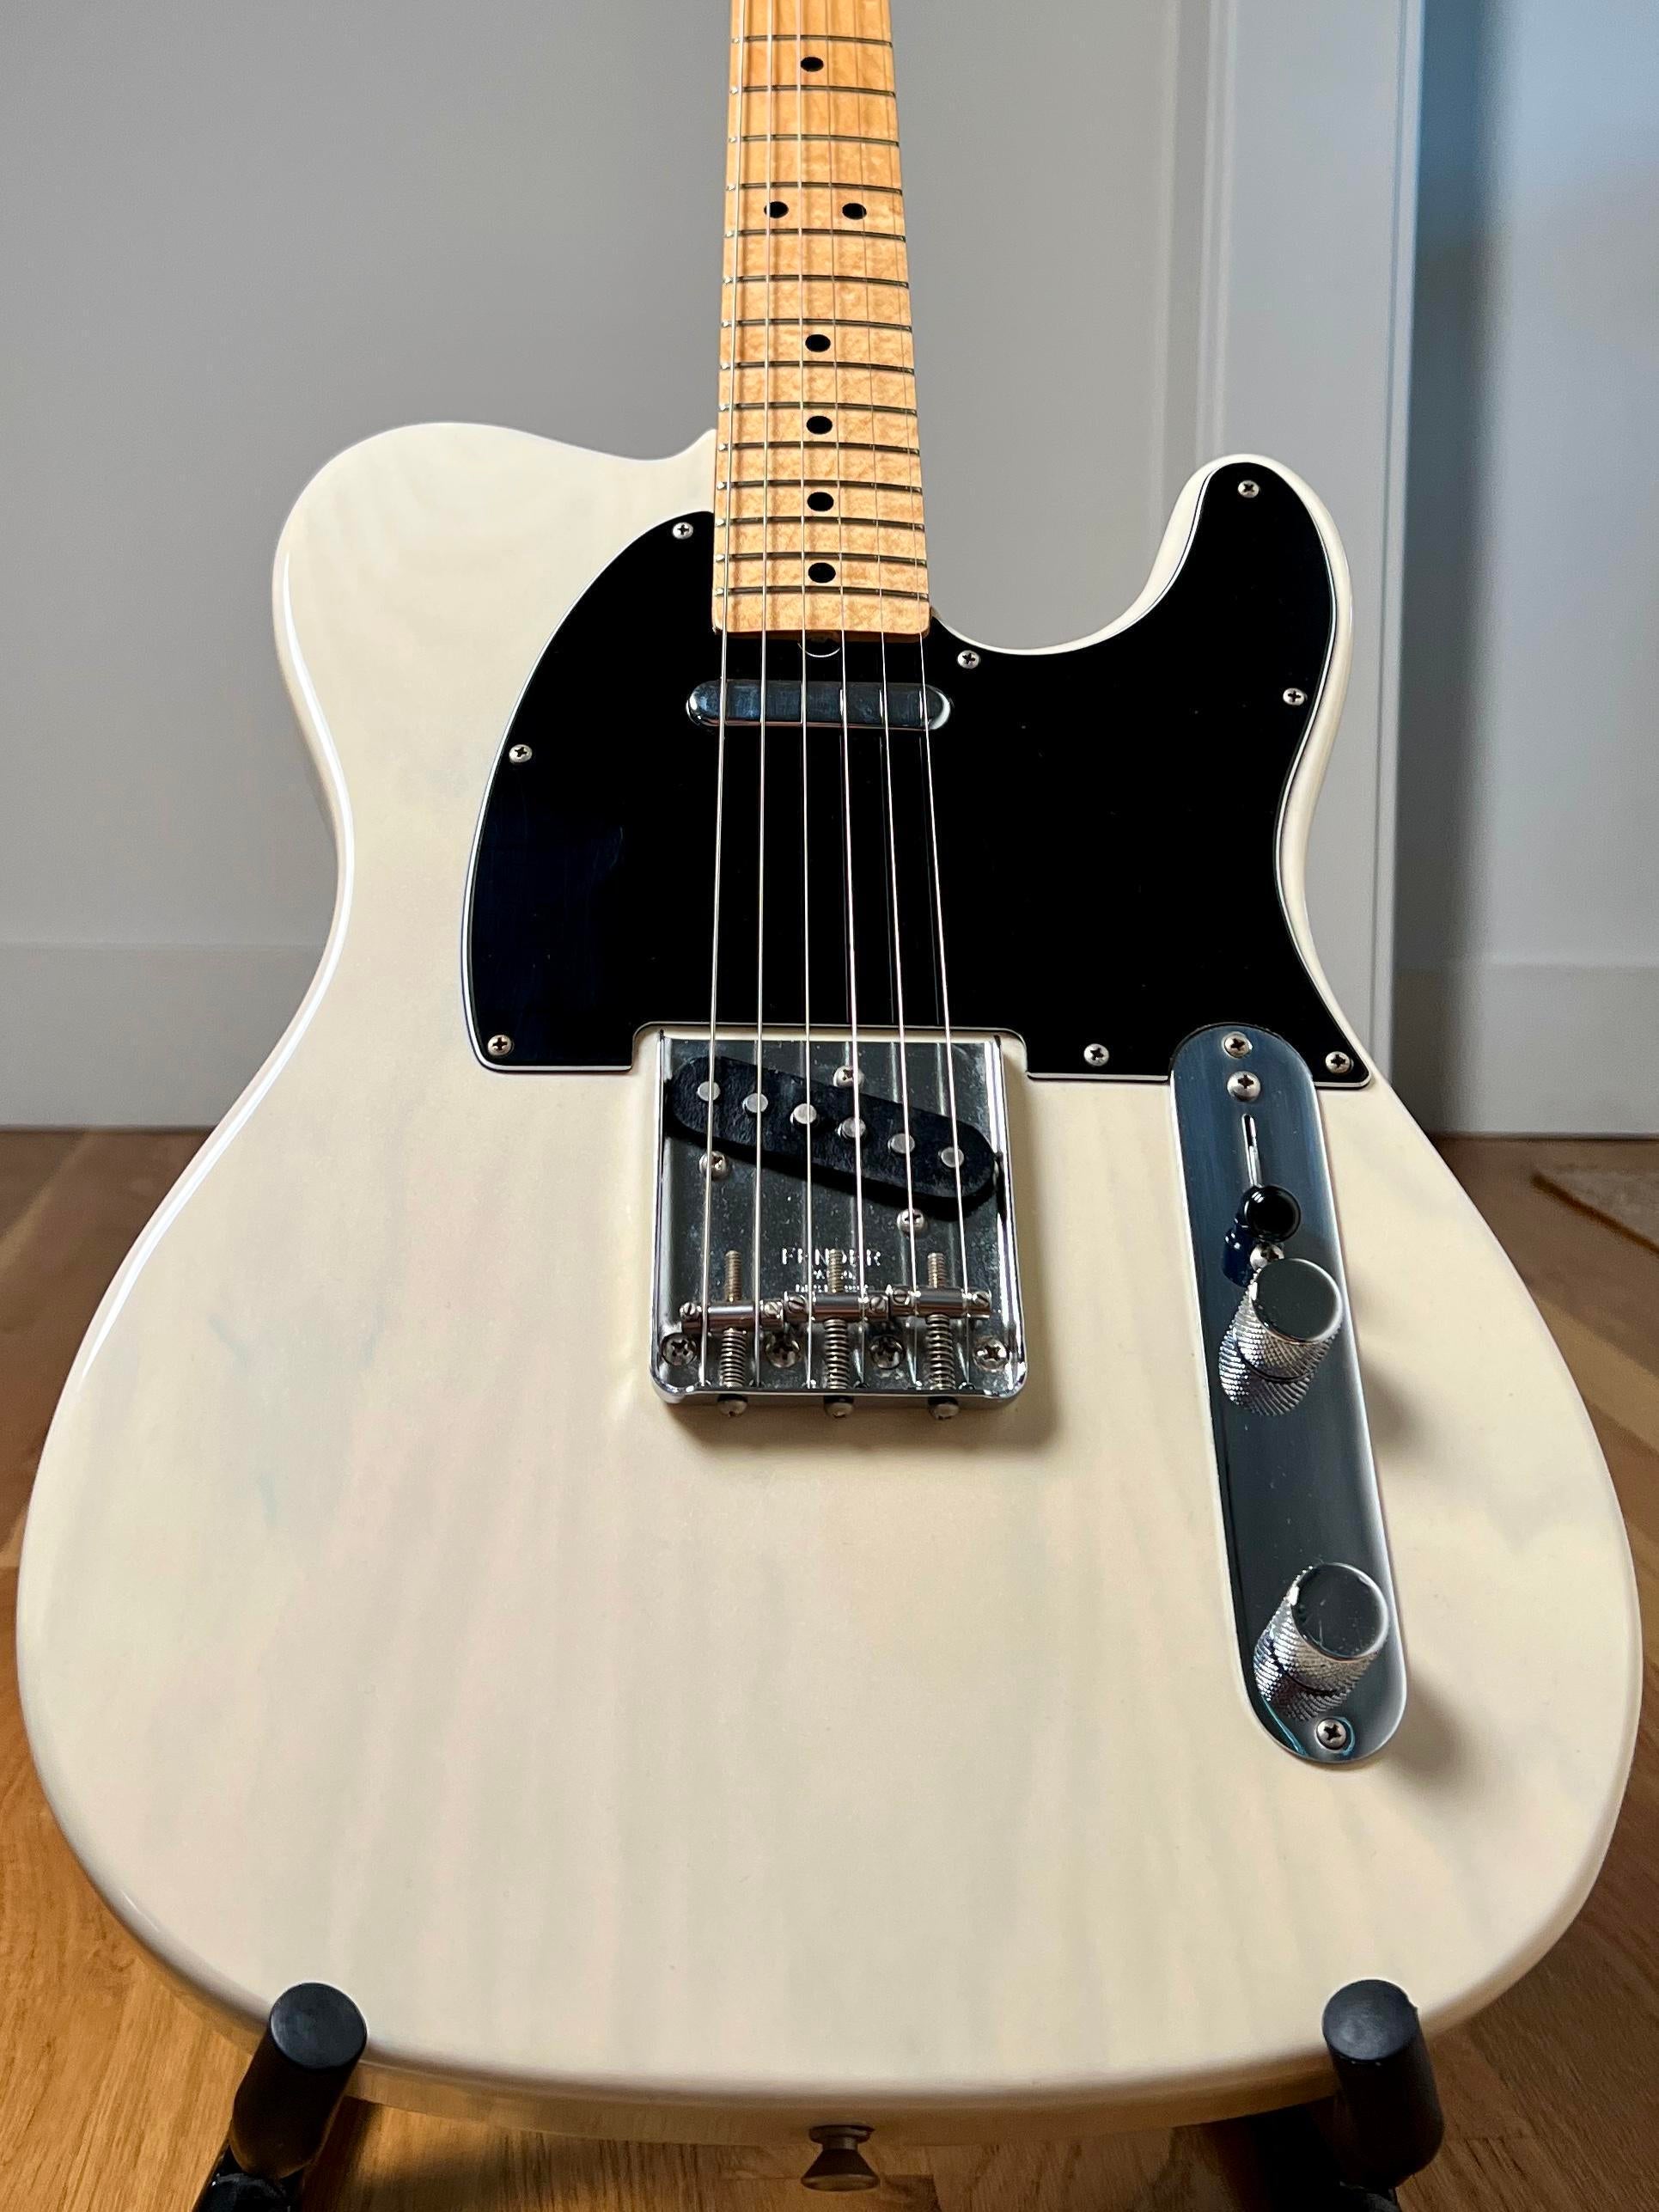 Used Fender Telecaster 1978 White / Blonde | - Sweetwater's Gear Exchange